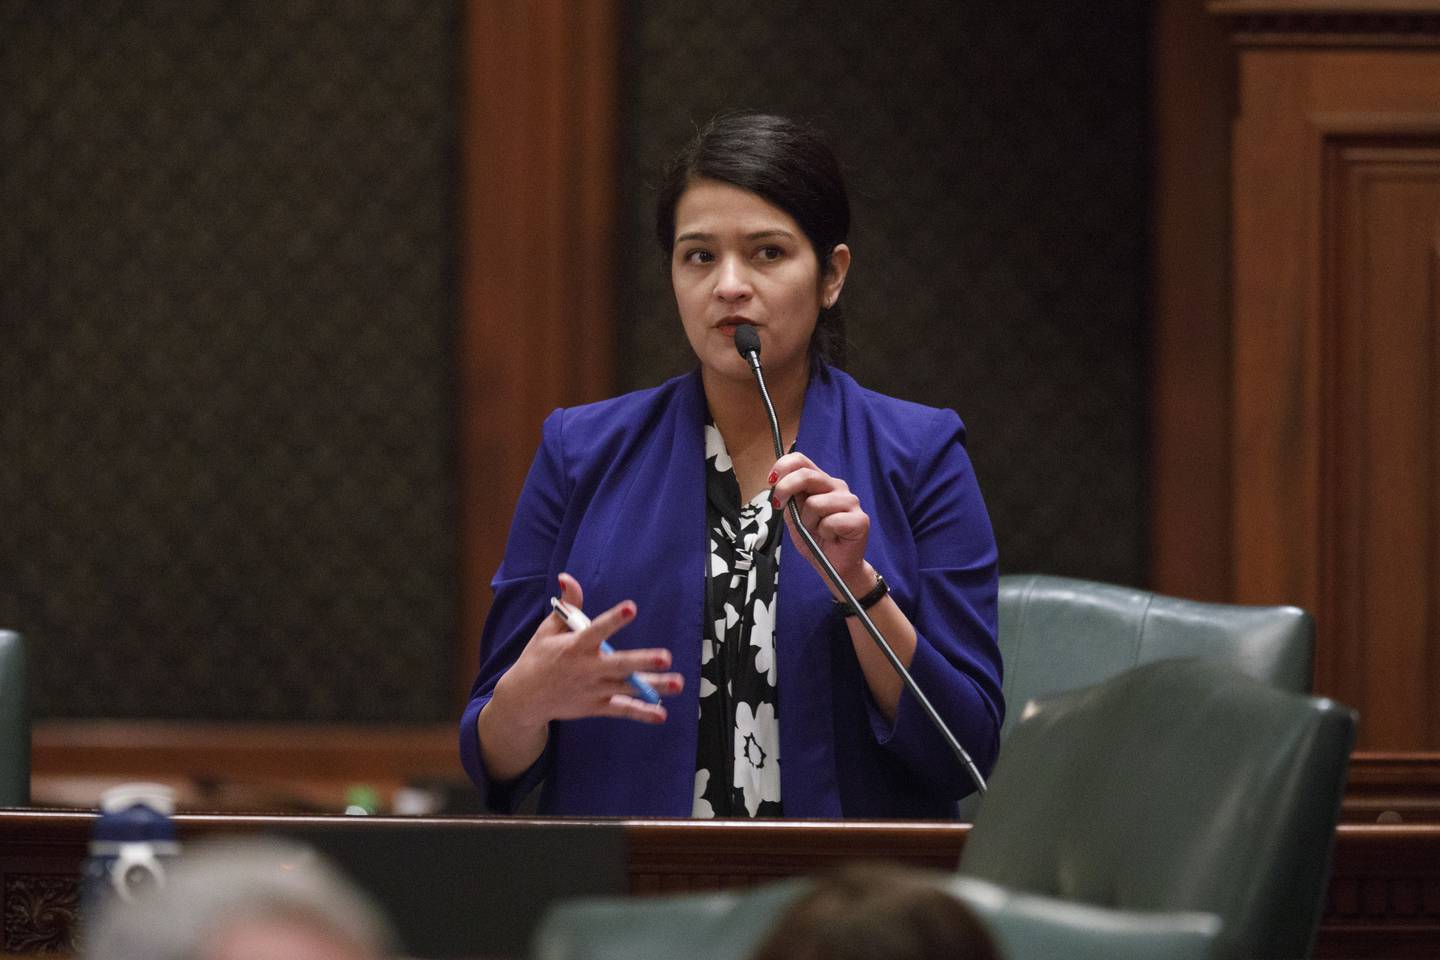 Then-Rep. Silvana Tabares on the House floor before a vote on legislation to license gun dealers during a session at the Illinois State Capitol in 2018.